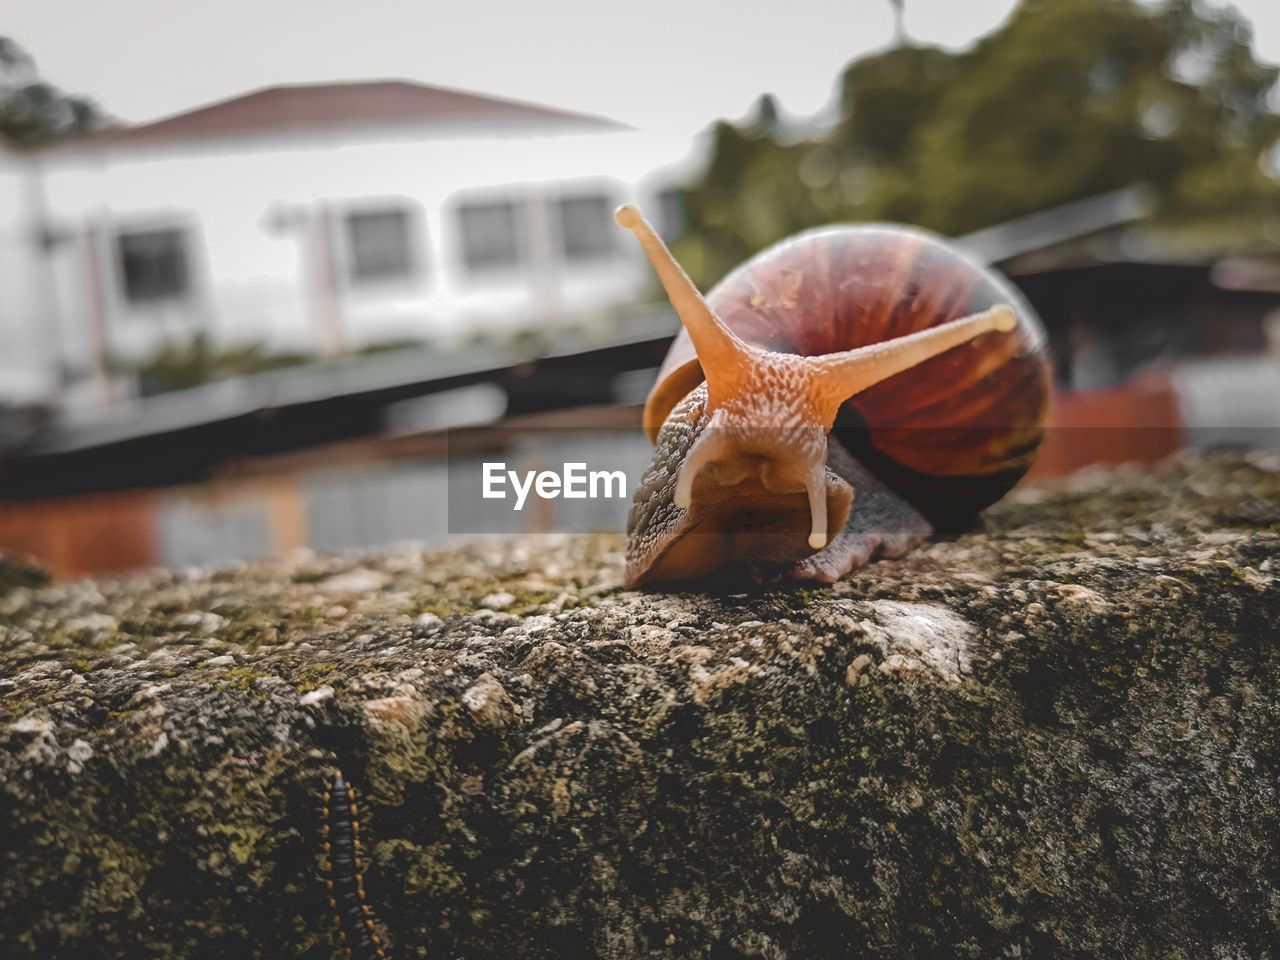 This is a photo of a snail relaxing on a fence.